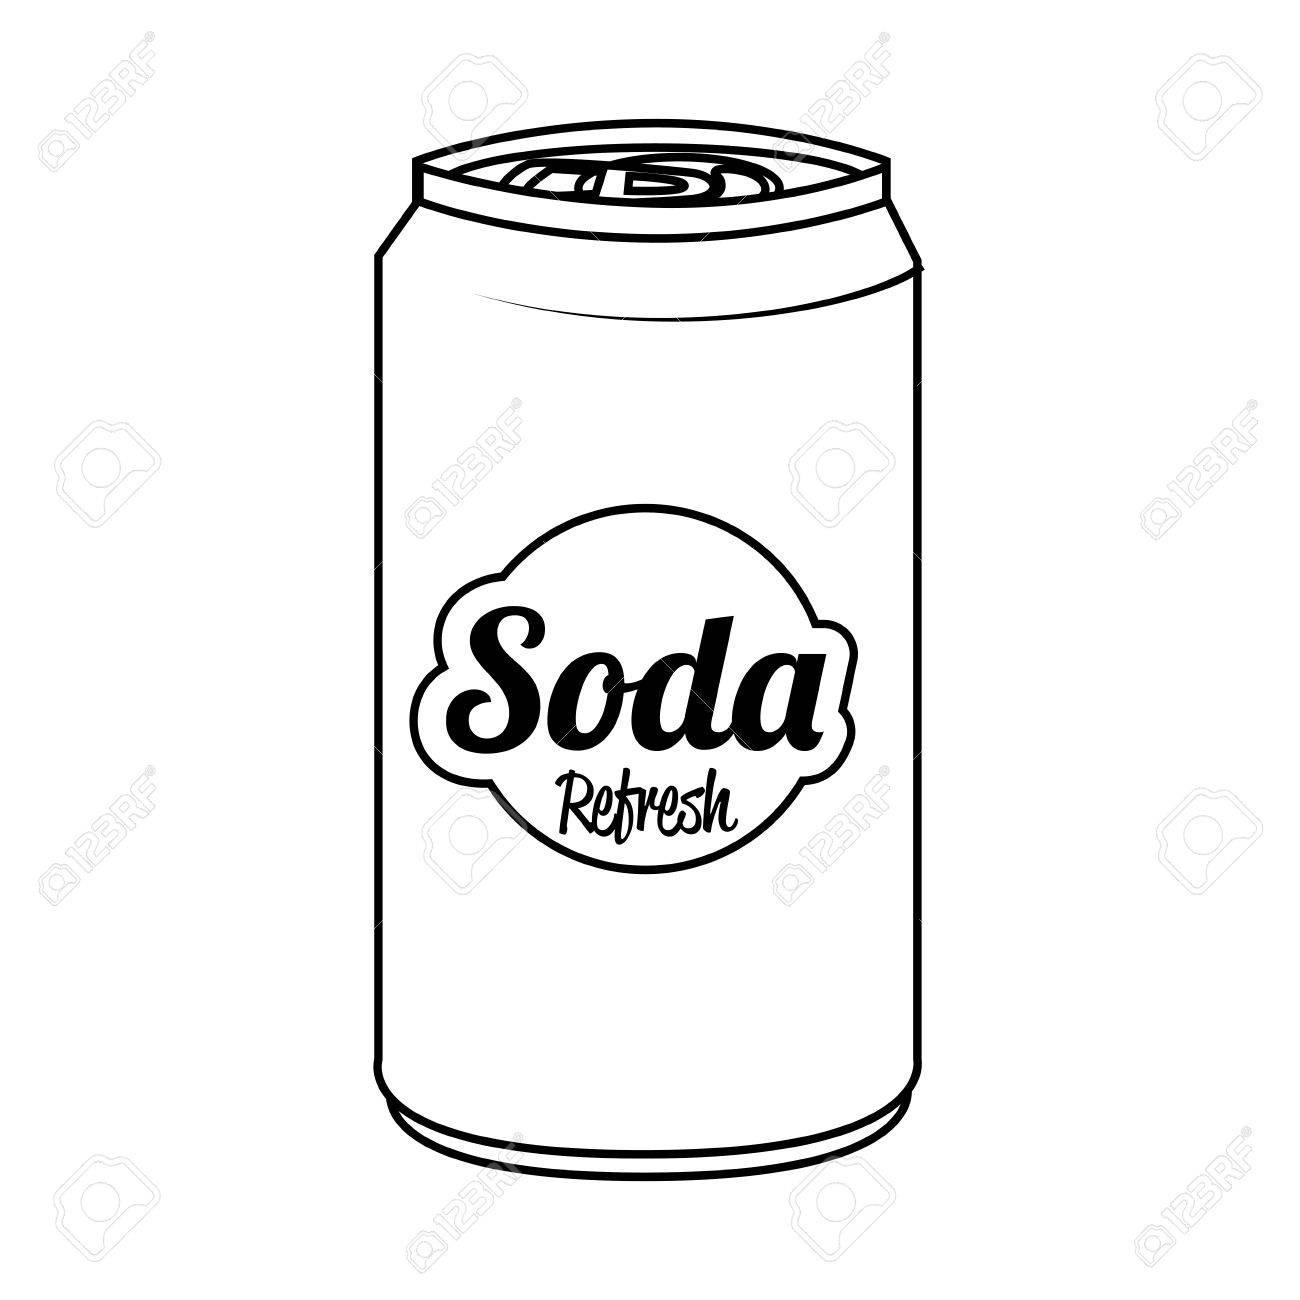 Soda can clipart.